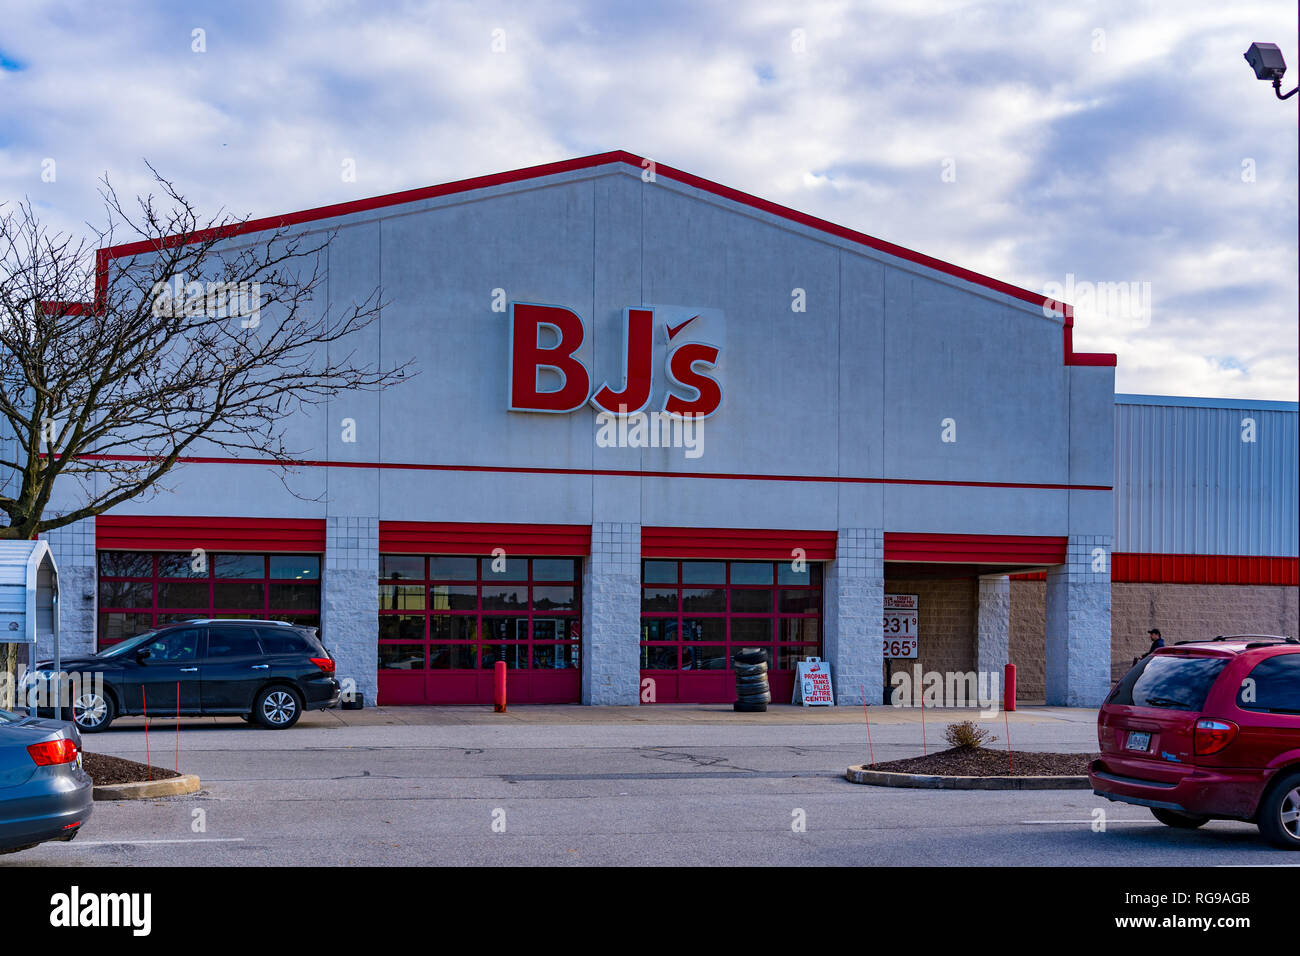 York, PA, USA - January 26, 2019: BJs Wholesale Club is an American membership-only warehouse chain operating in the Eastern United States. The club h Stock Photo